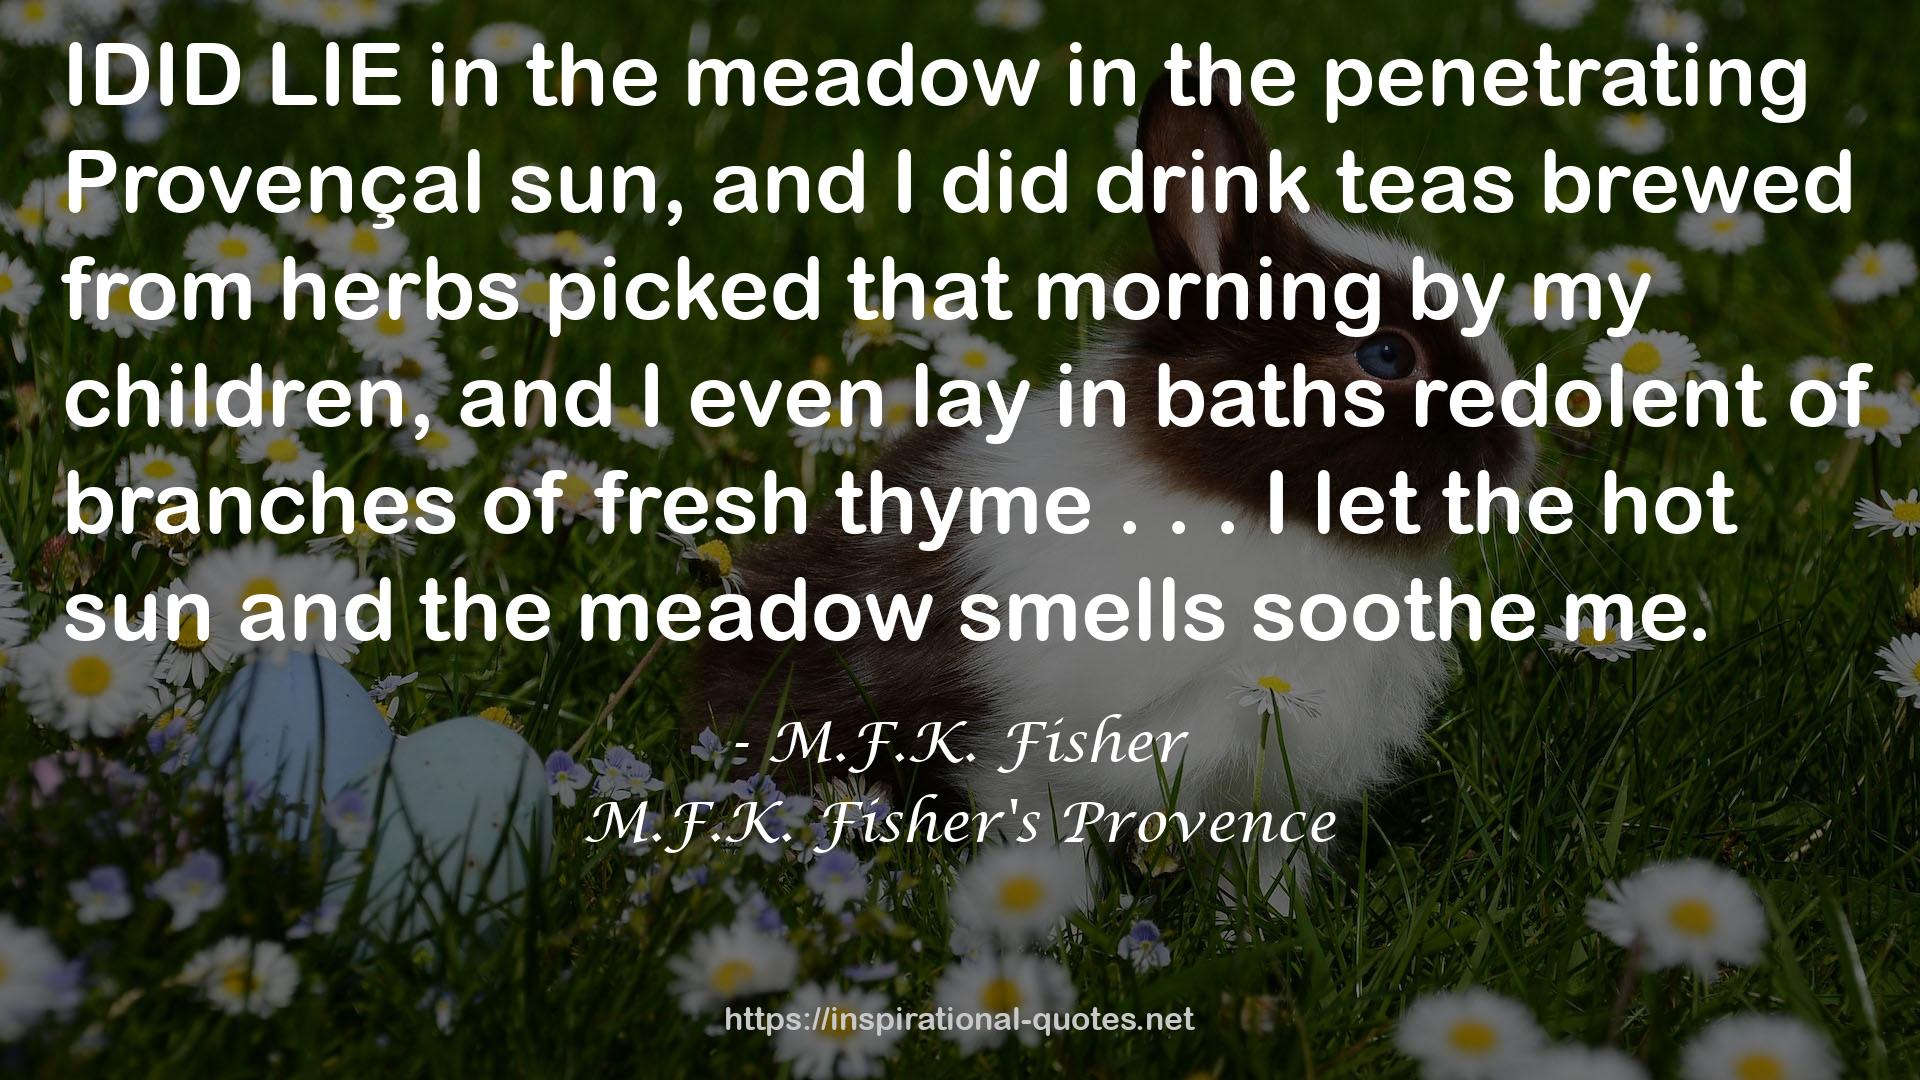 M.F.K. Fisher's Provence QUOTES